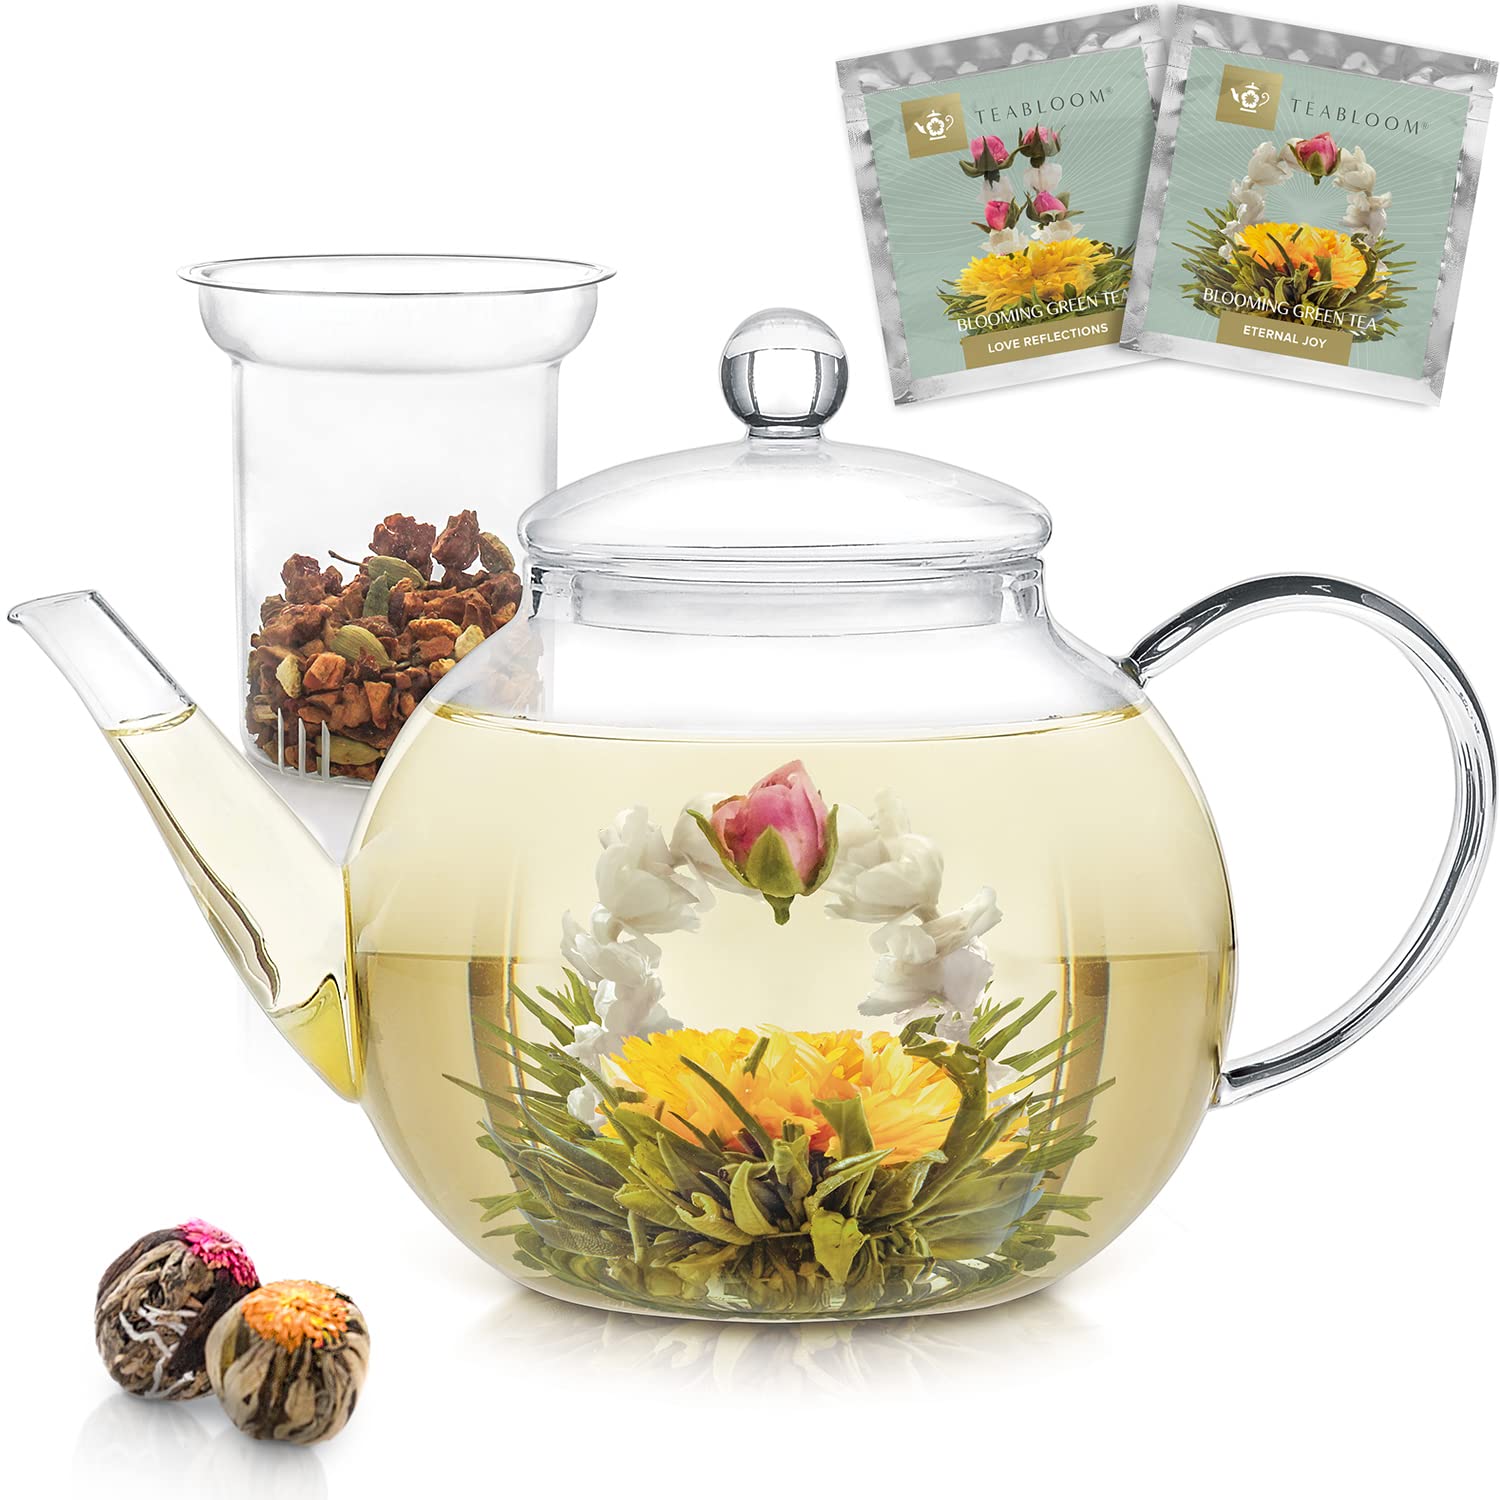 Teabloom Stovetop & Microwave Safe Teapot (40 oz) with Removable Loose Tea Glass Infuser - Includes 2 Blooming Teas - 2-in-1 Tea